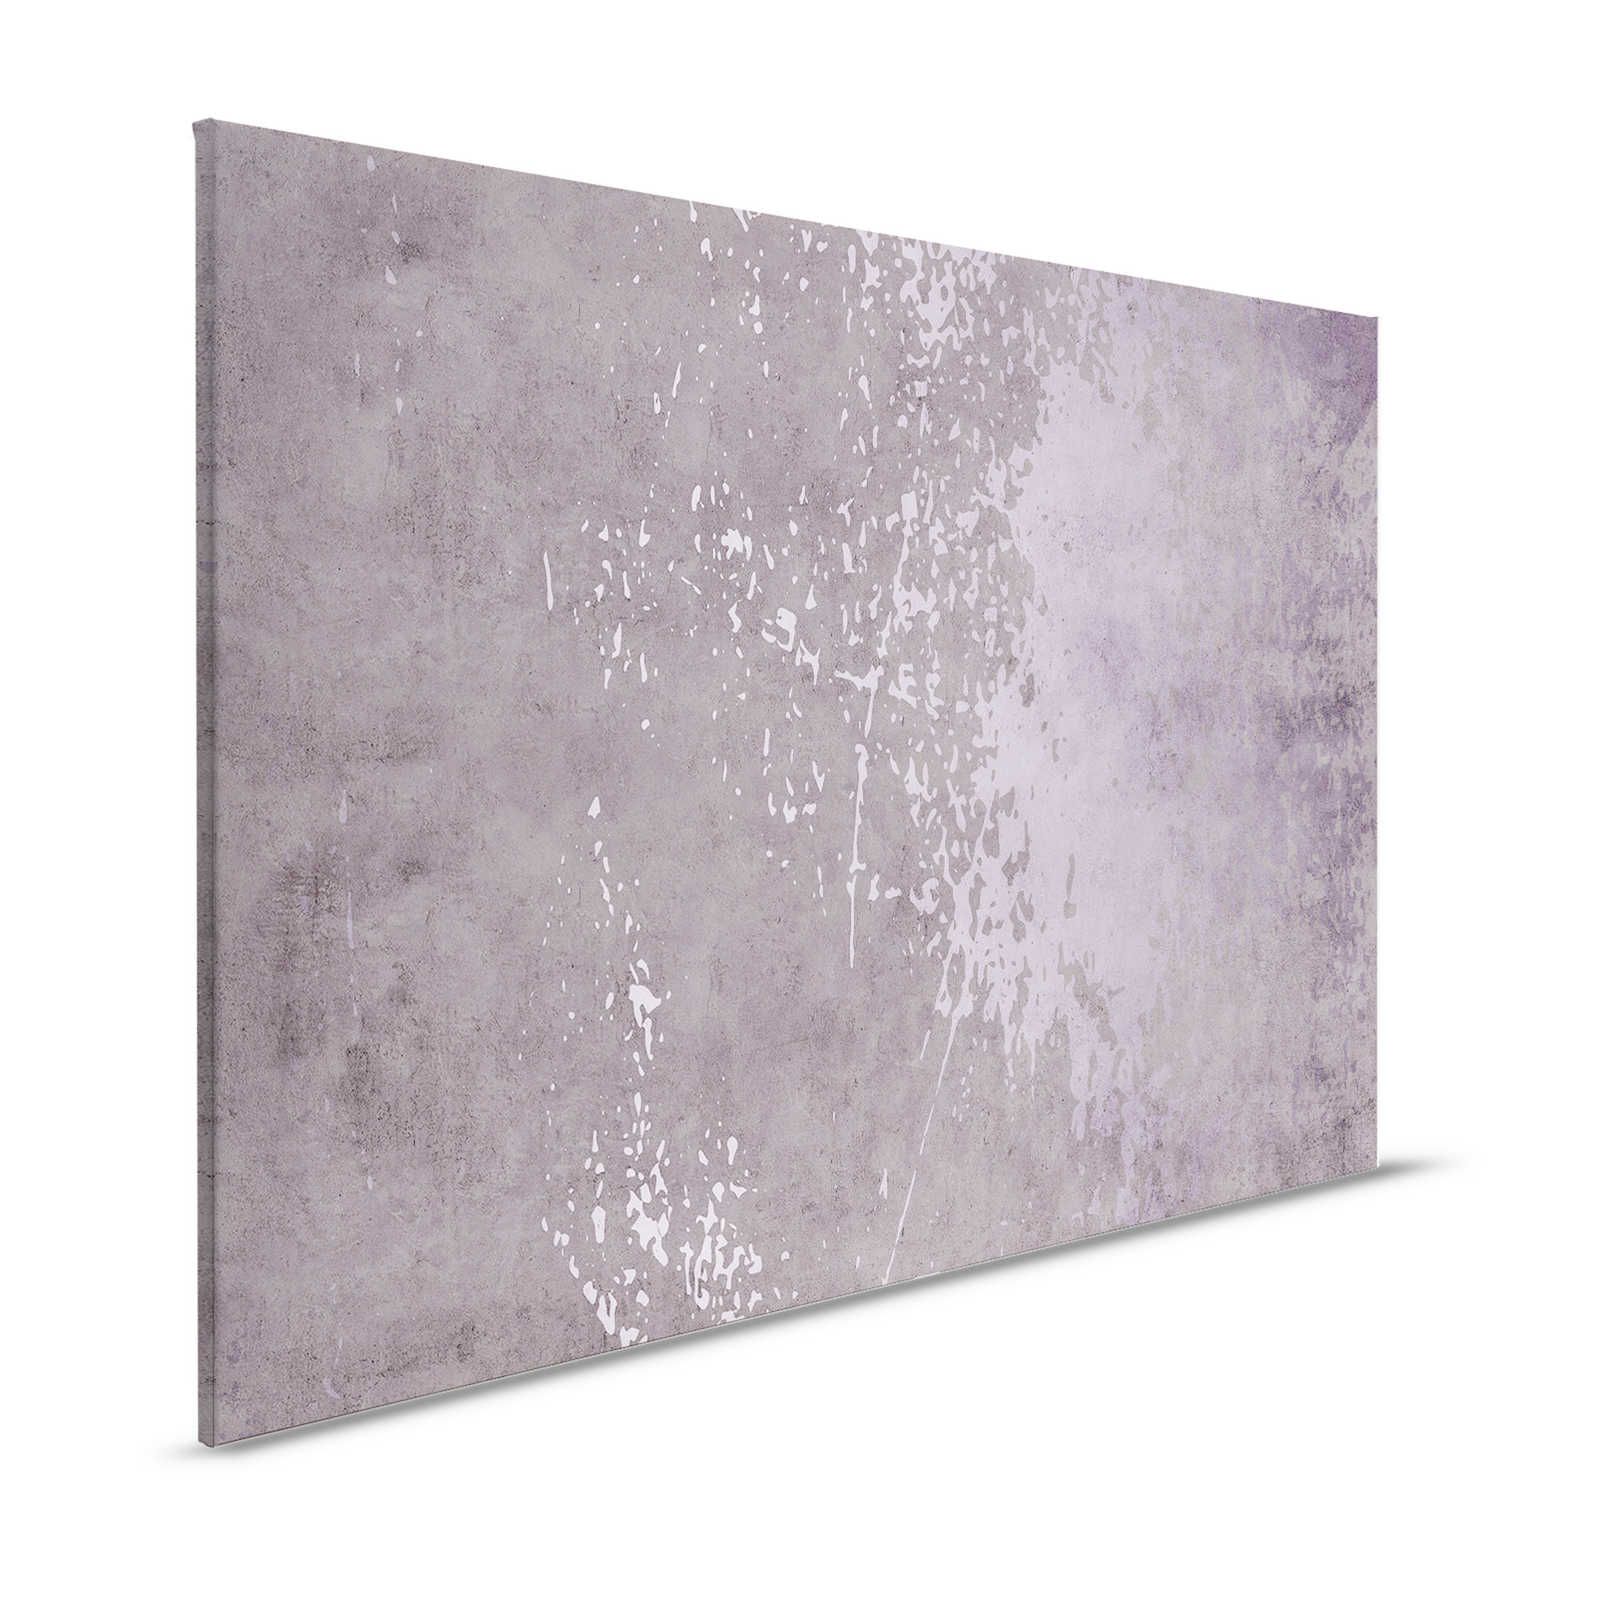 Vintage Wall 2 - Canvas painting lilac plaster design in used look - 1.20 m x 0.80 m
